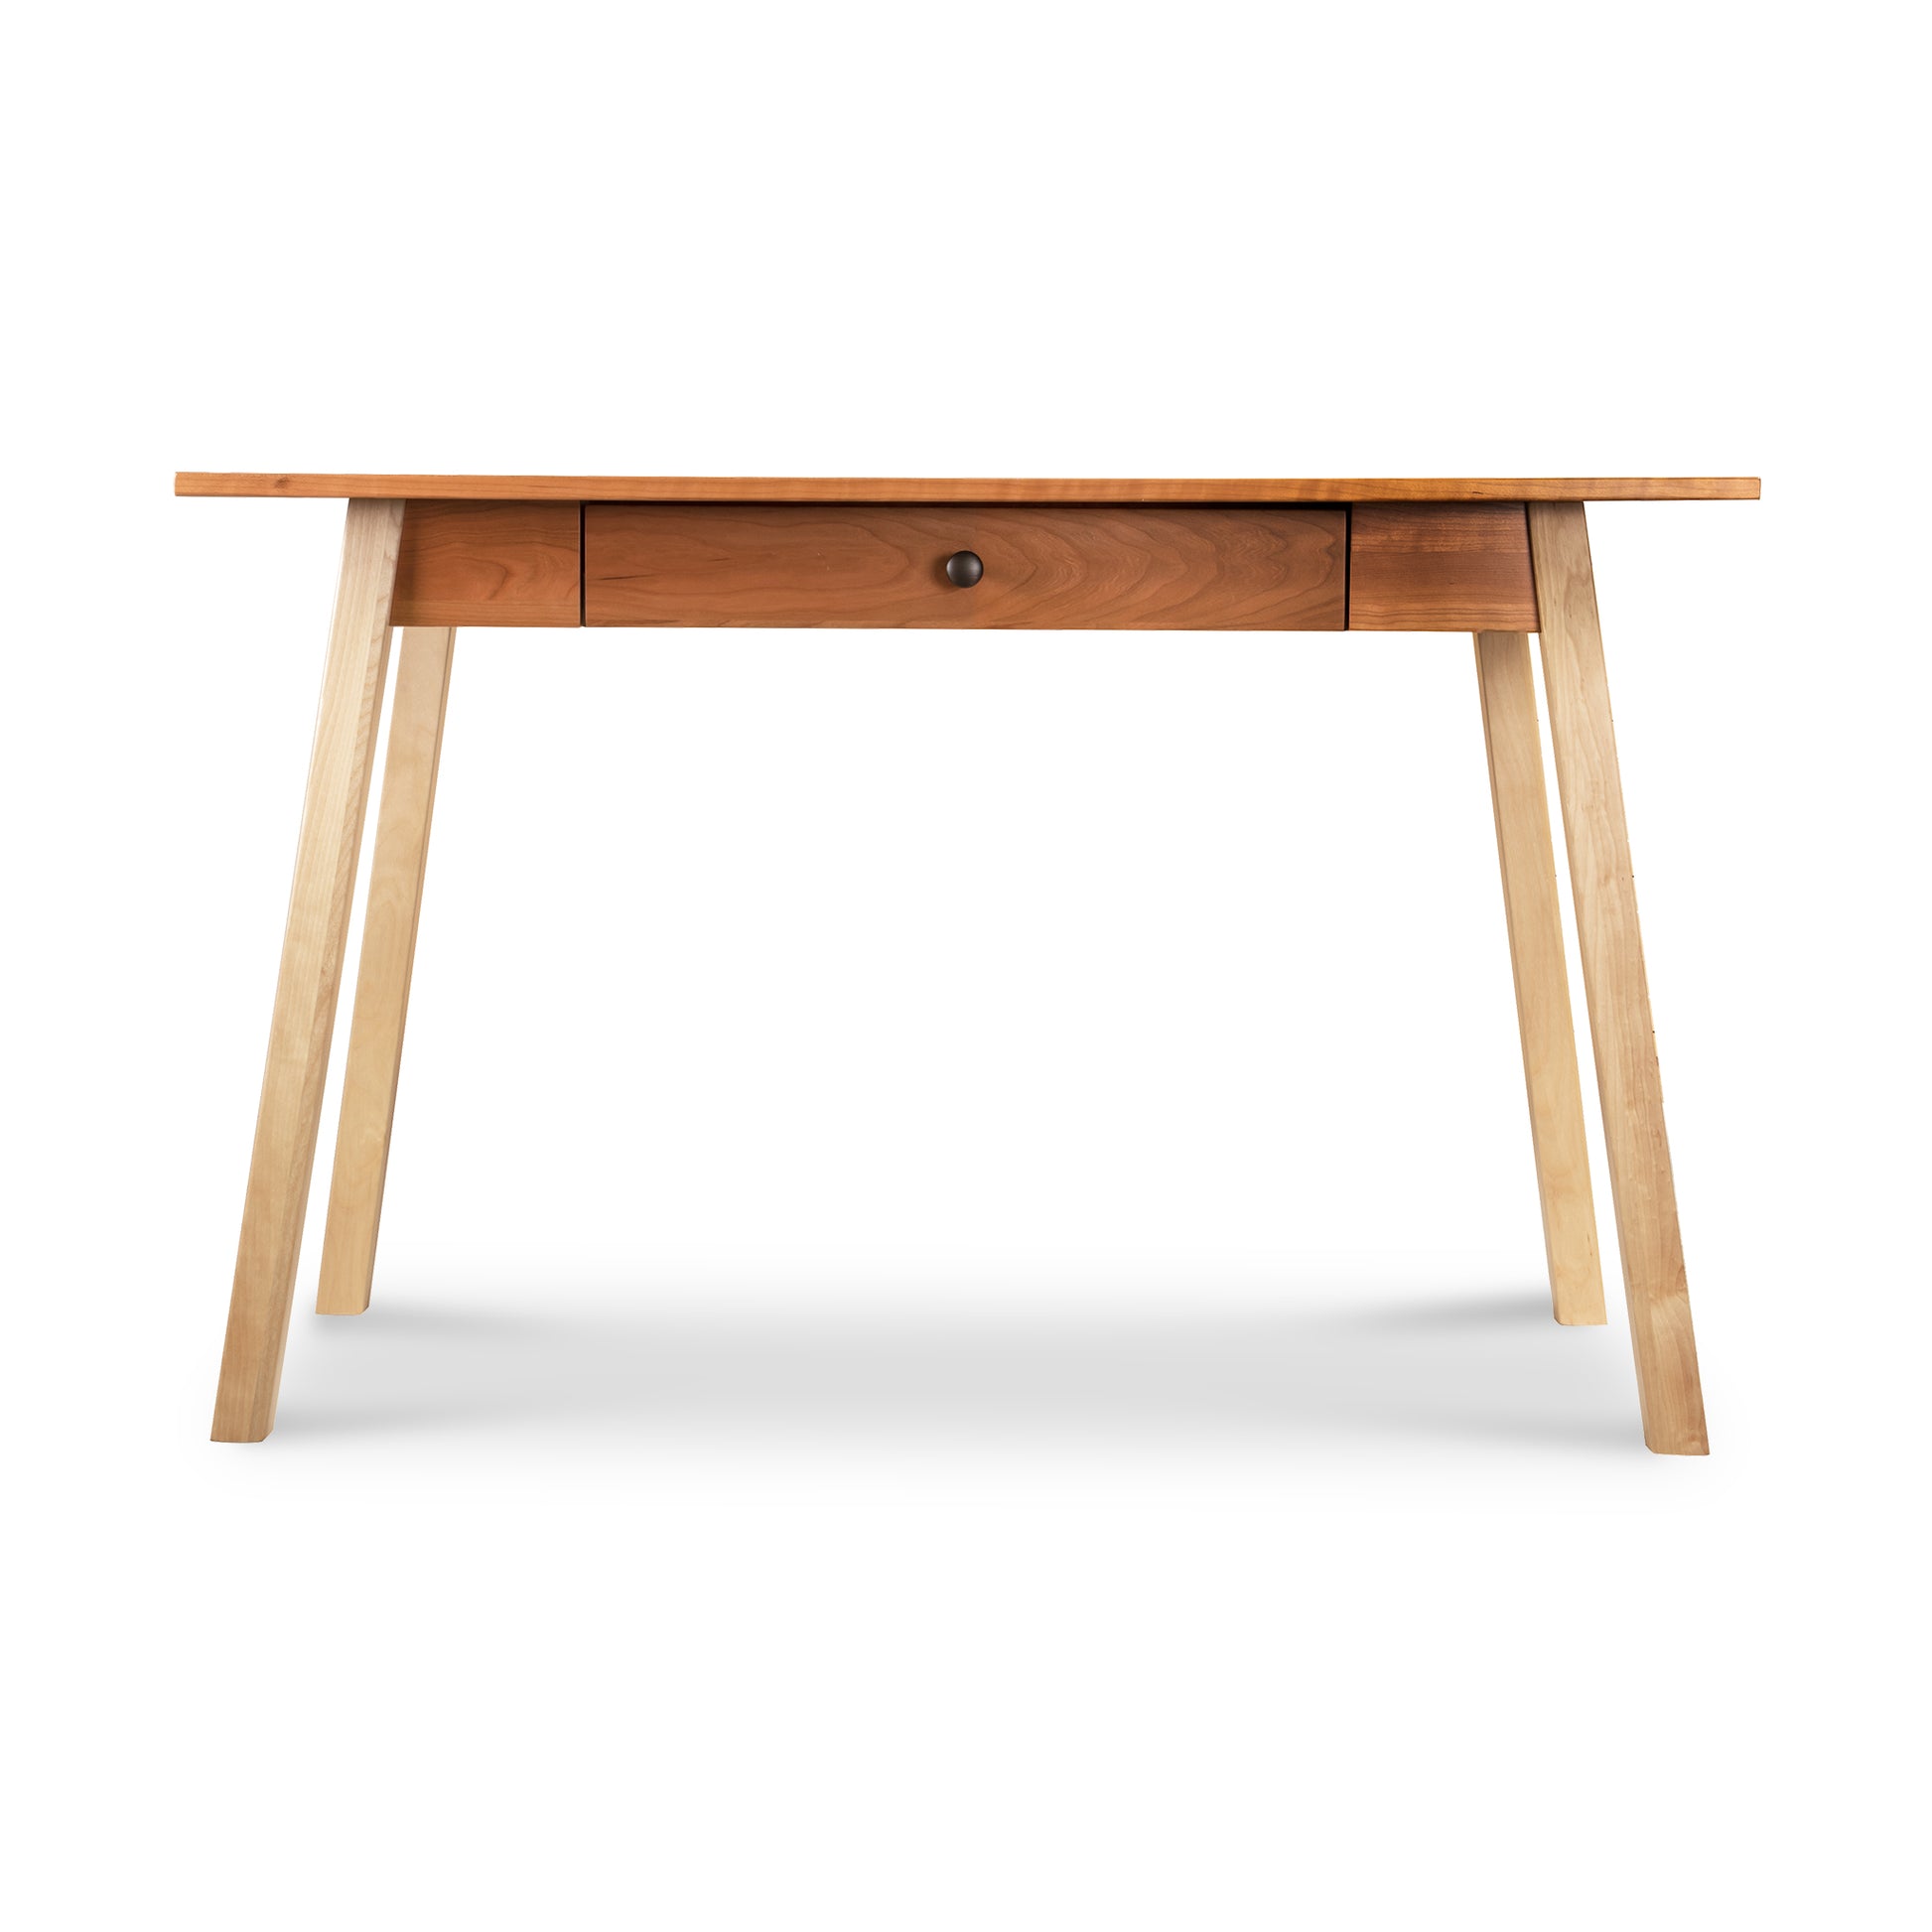 A wooden desk with a drawer and legs.